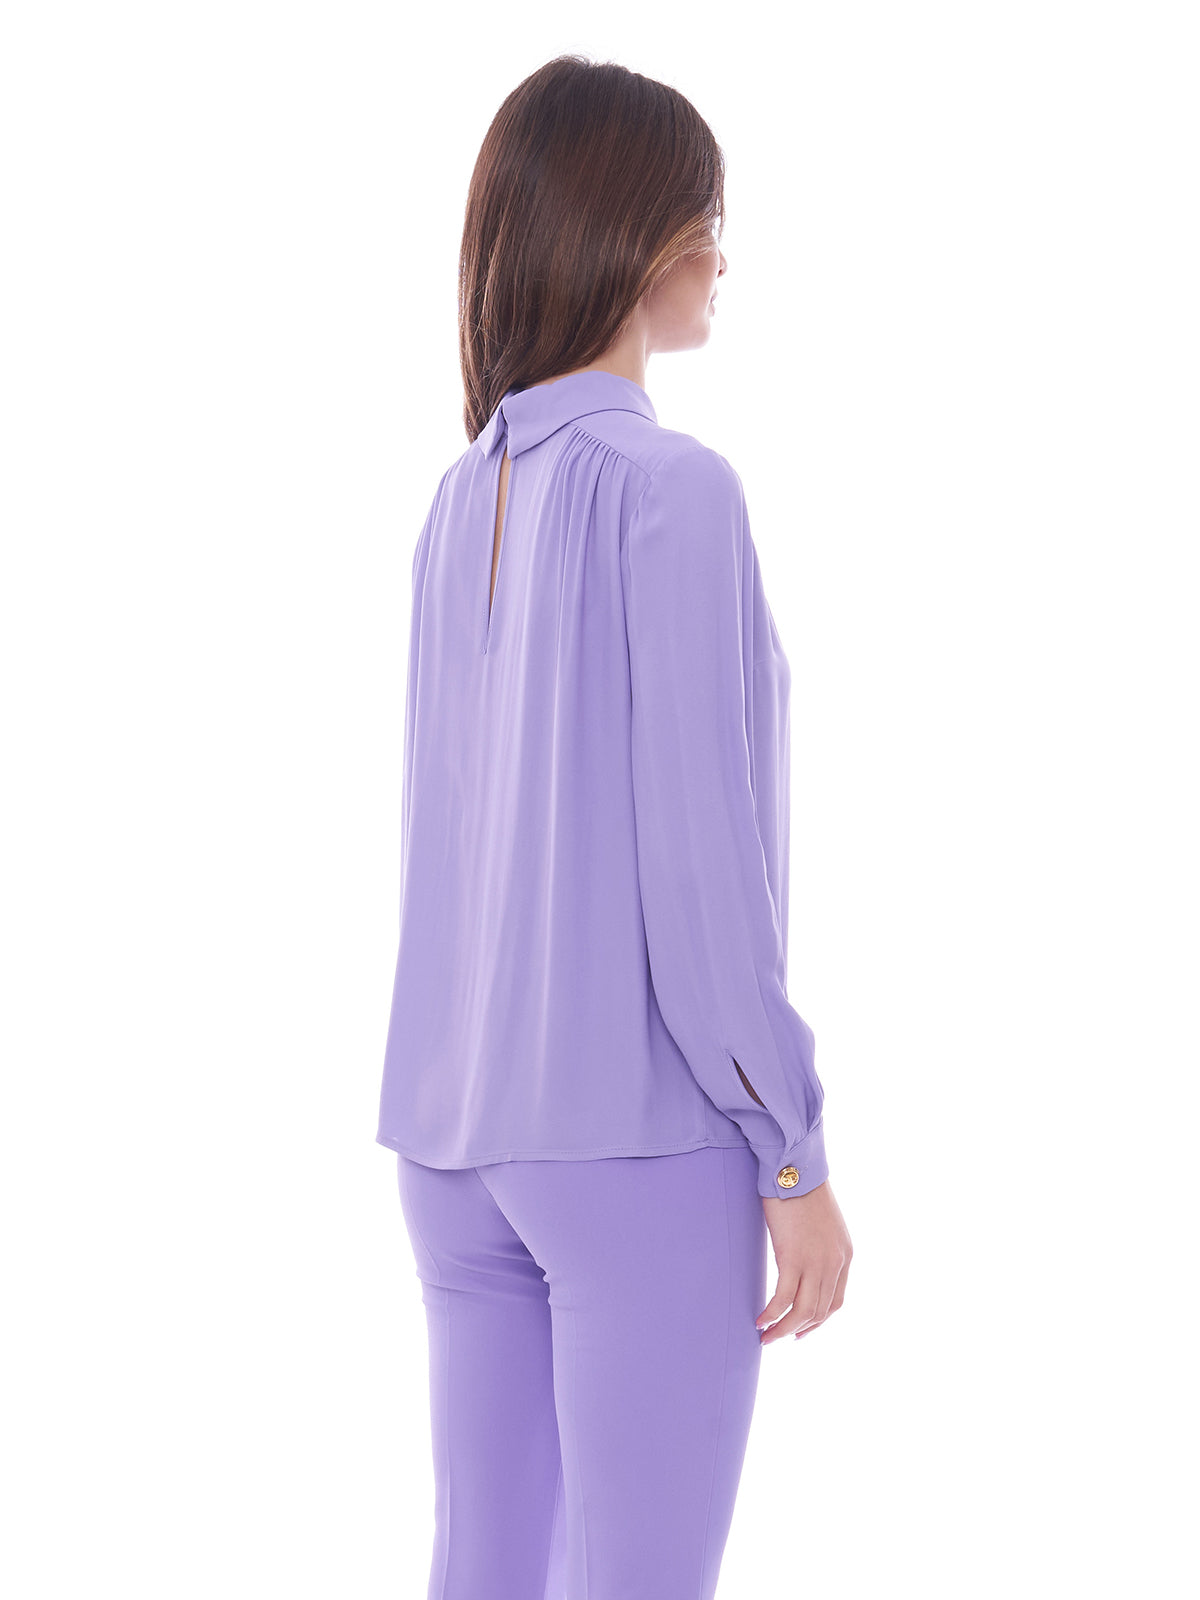 Elisabetta Franchi viscose georgette shirt with accessory on the neck